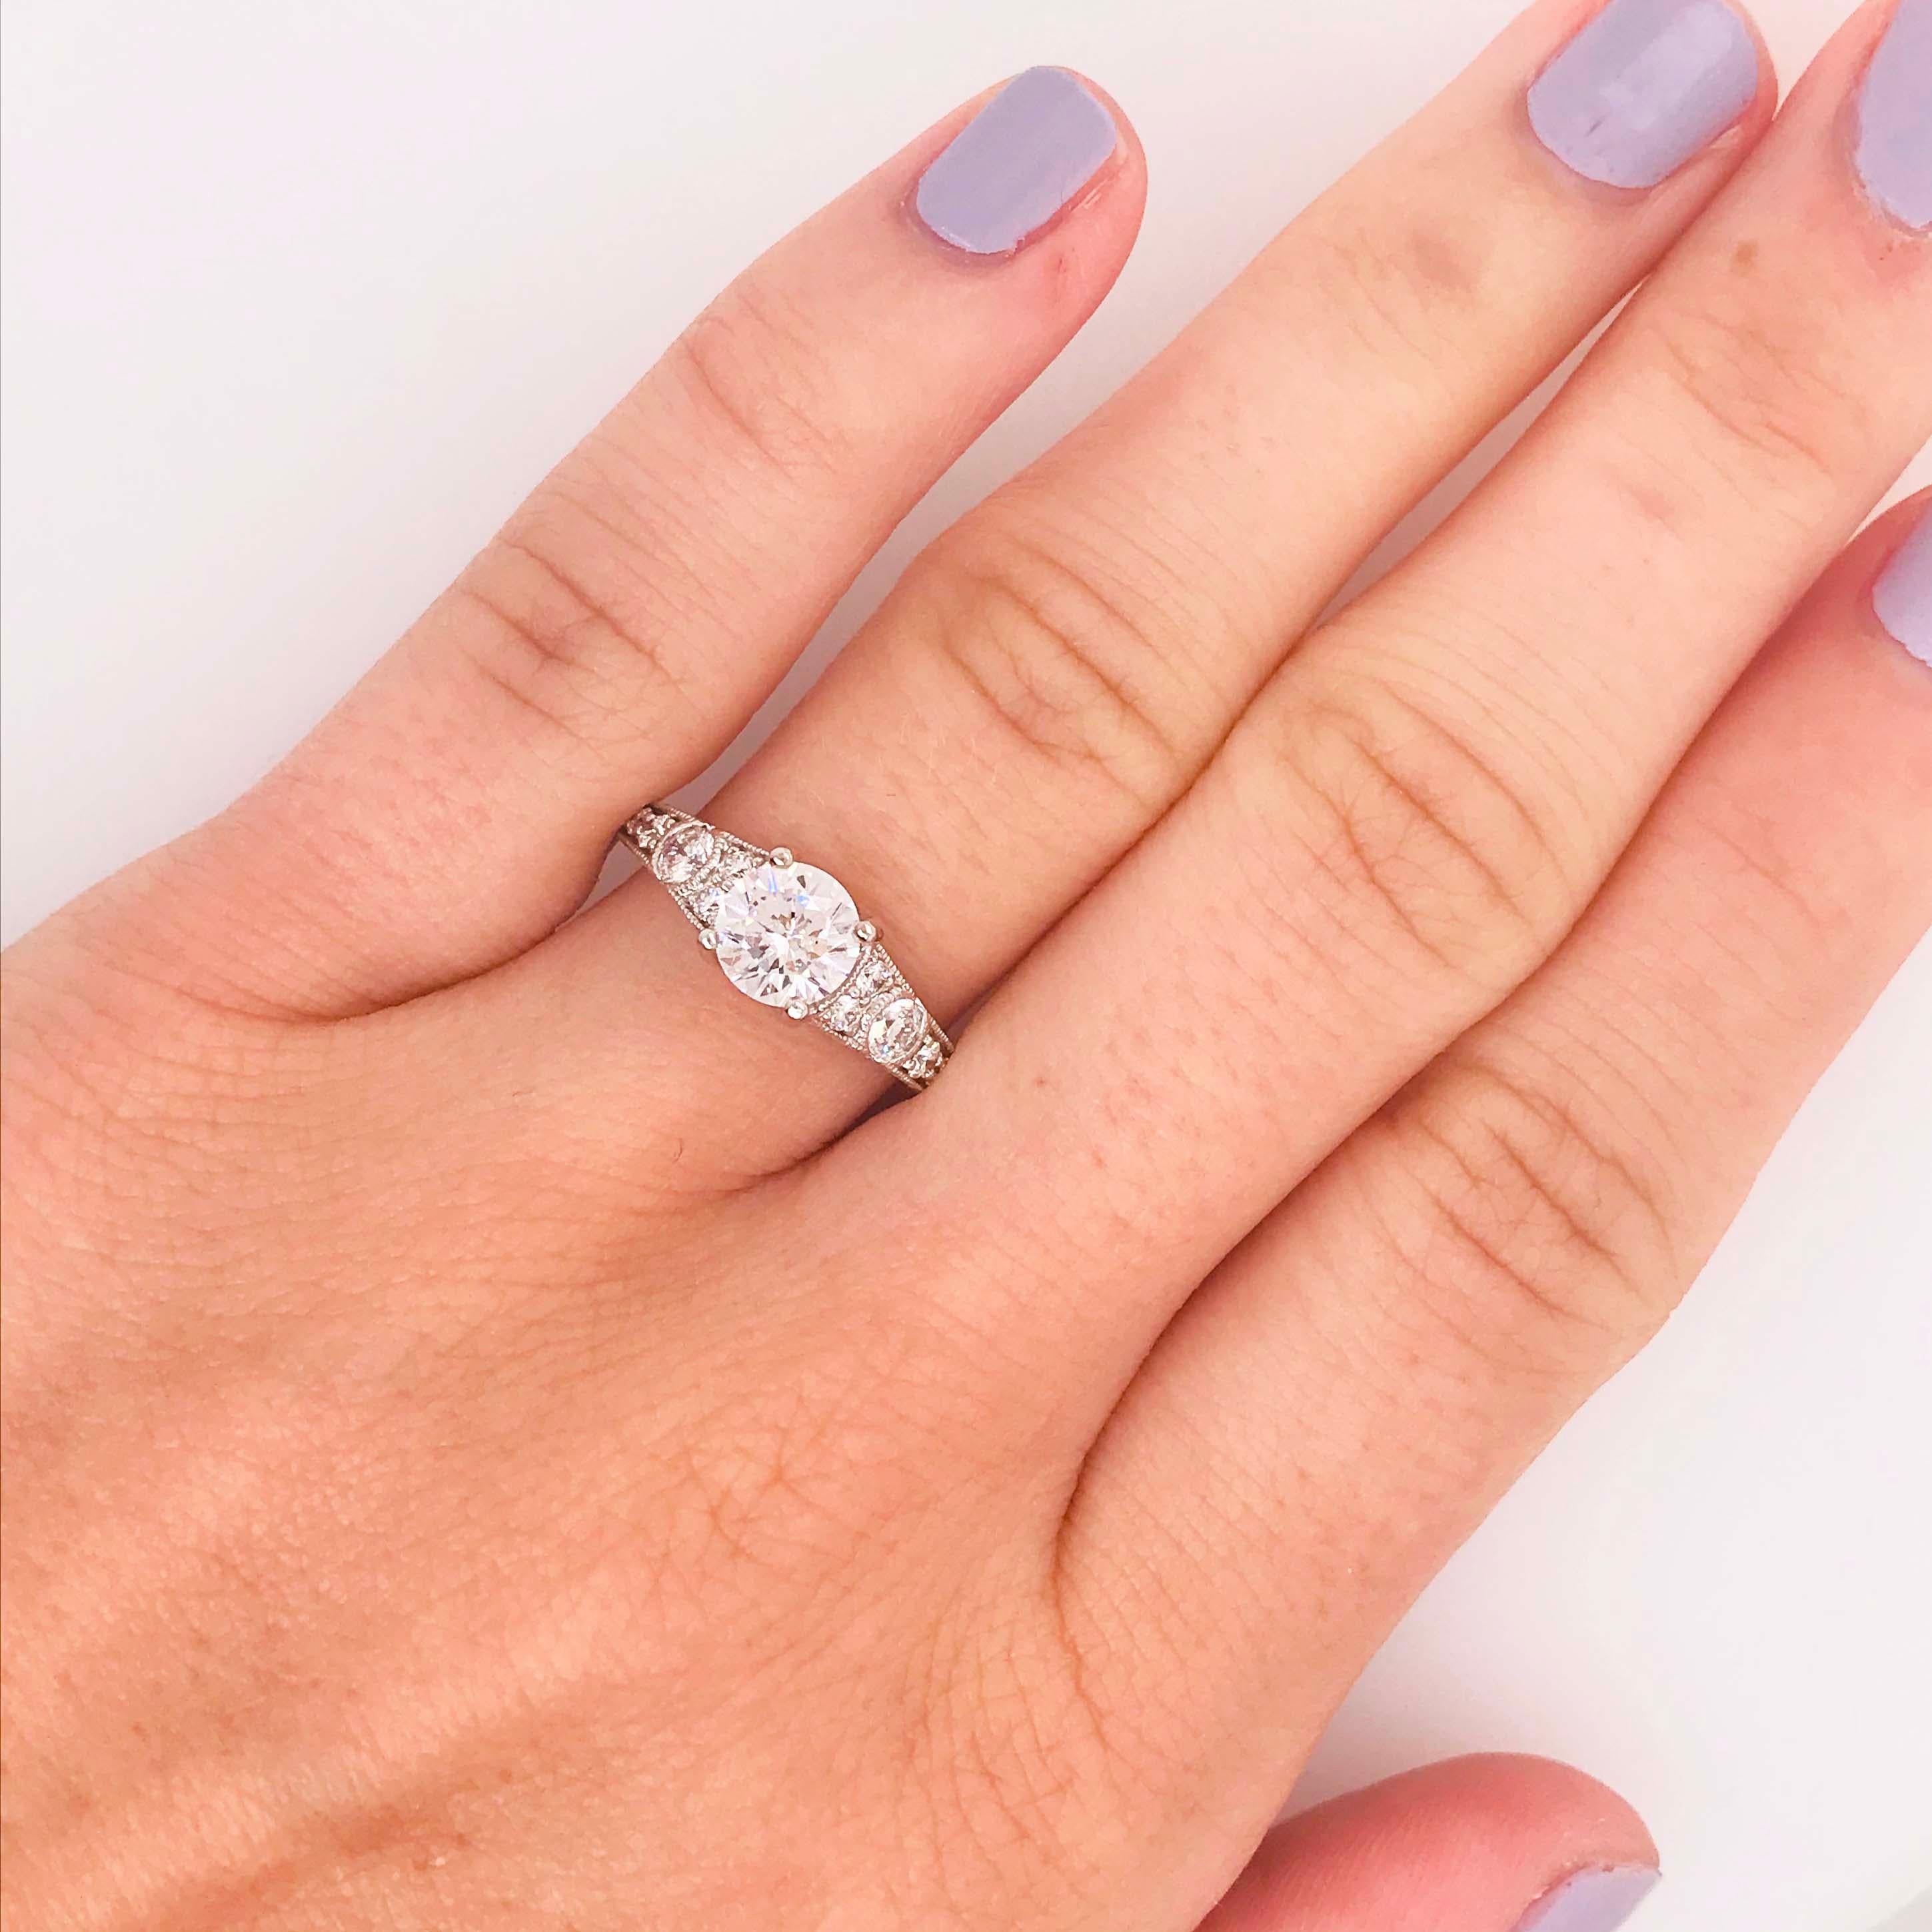 This vintage styled diamond engagement ring has a 1.01 carat round brilliant, Hearts & Arrows diamond set in the center! The 14 karat white gold, vintage/antique designed ring has the most beautiful and intricate design with diamonds going half way